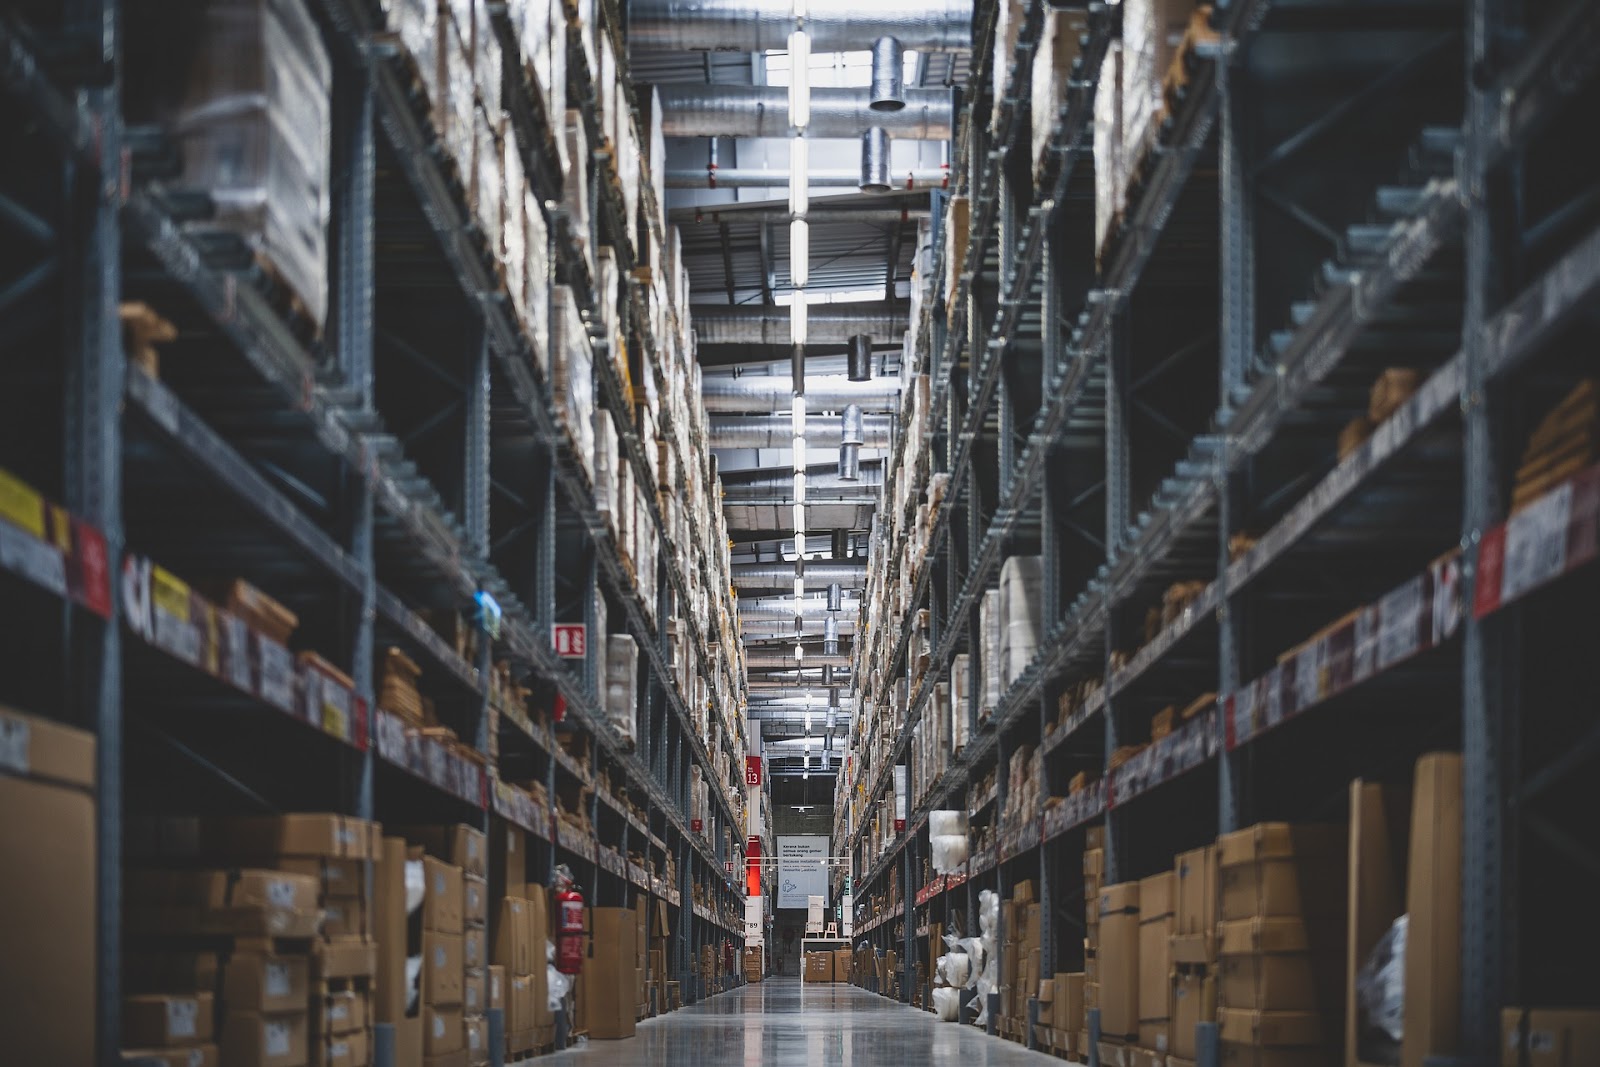 it is necessary to find the right inventory management solution for unexpected stock levels